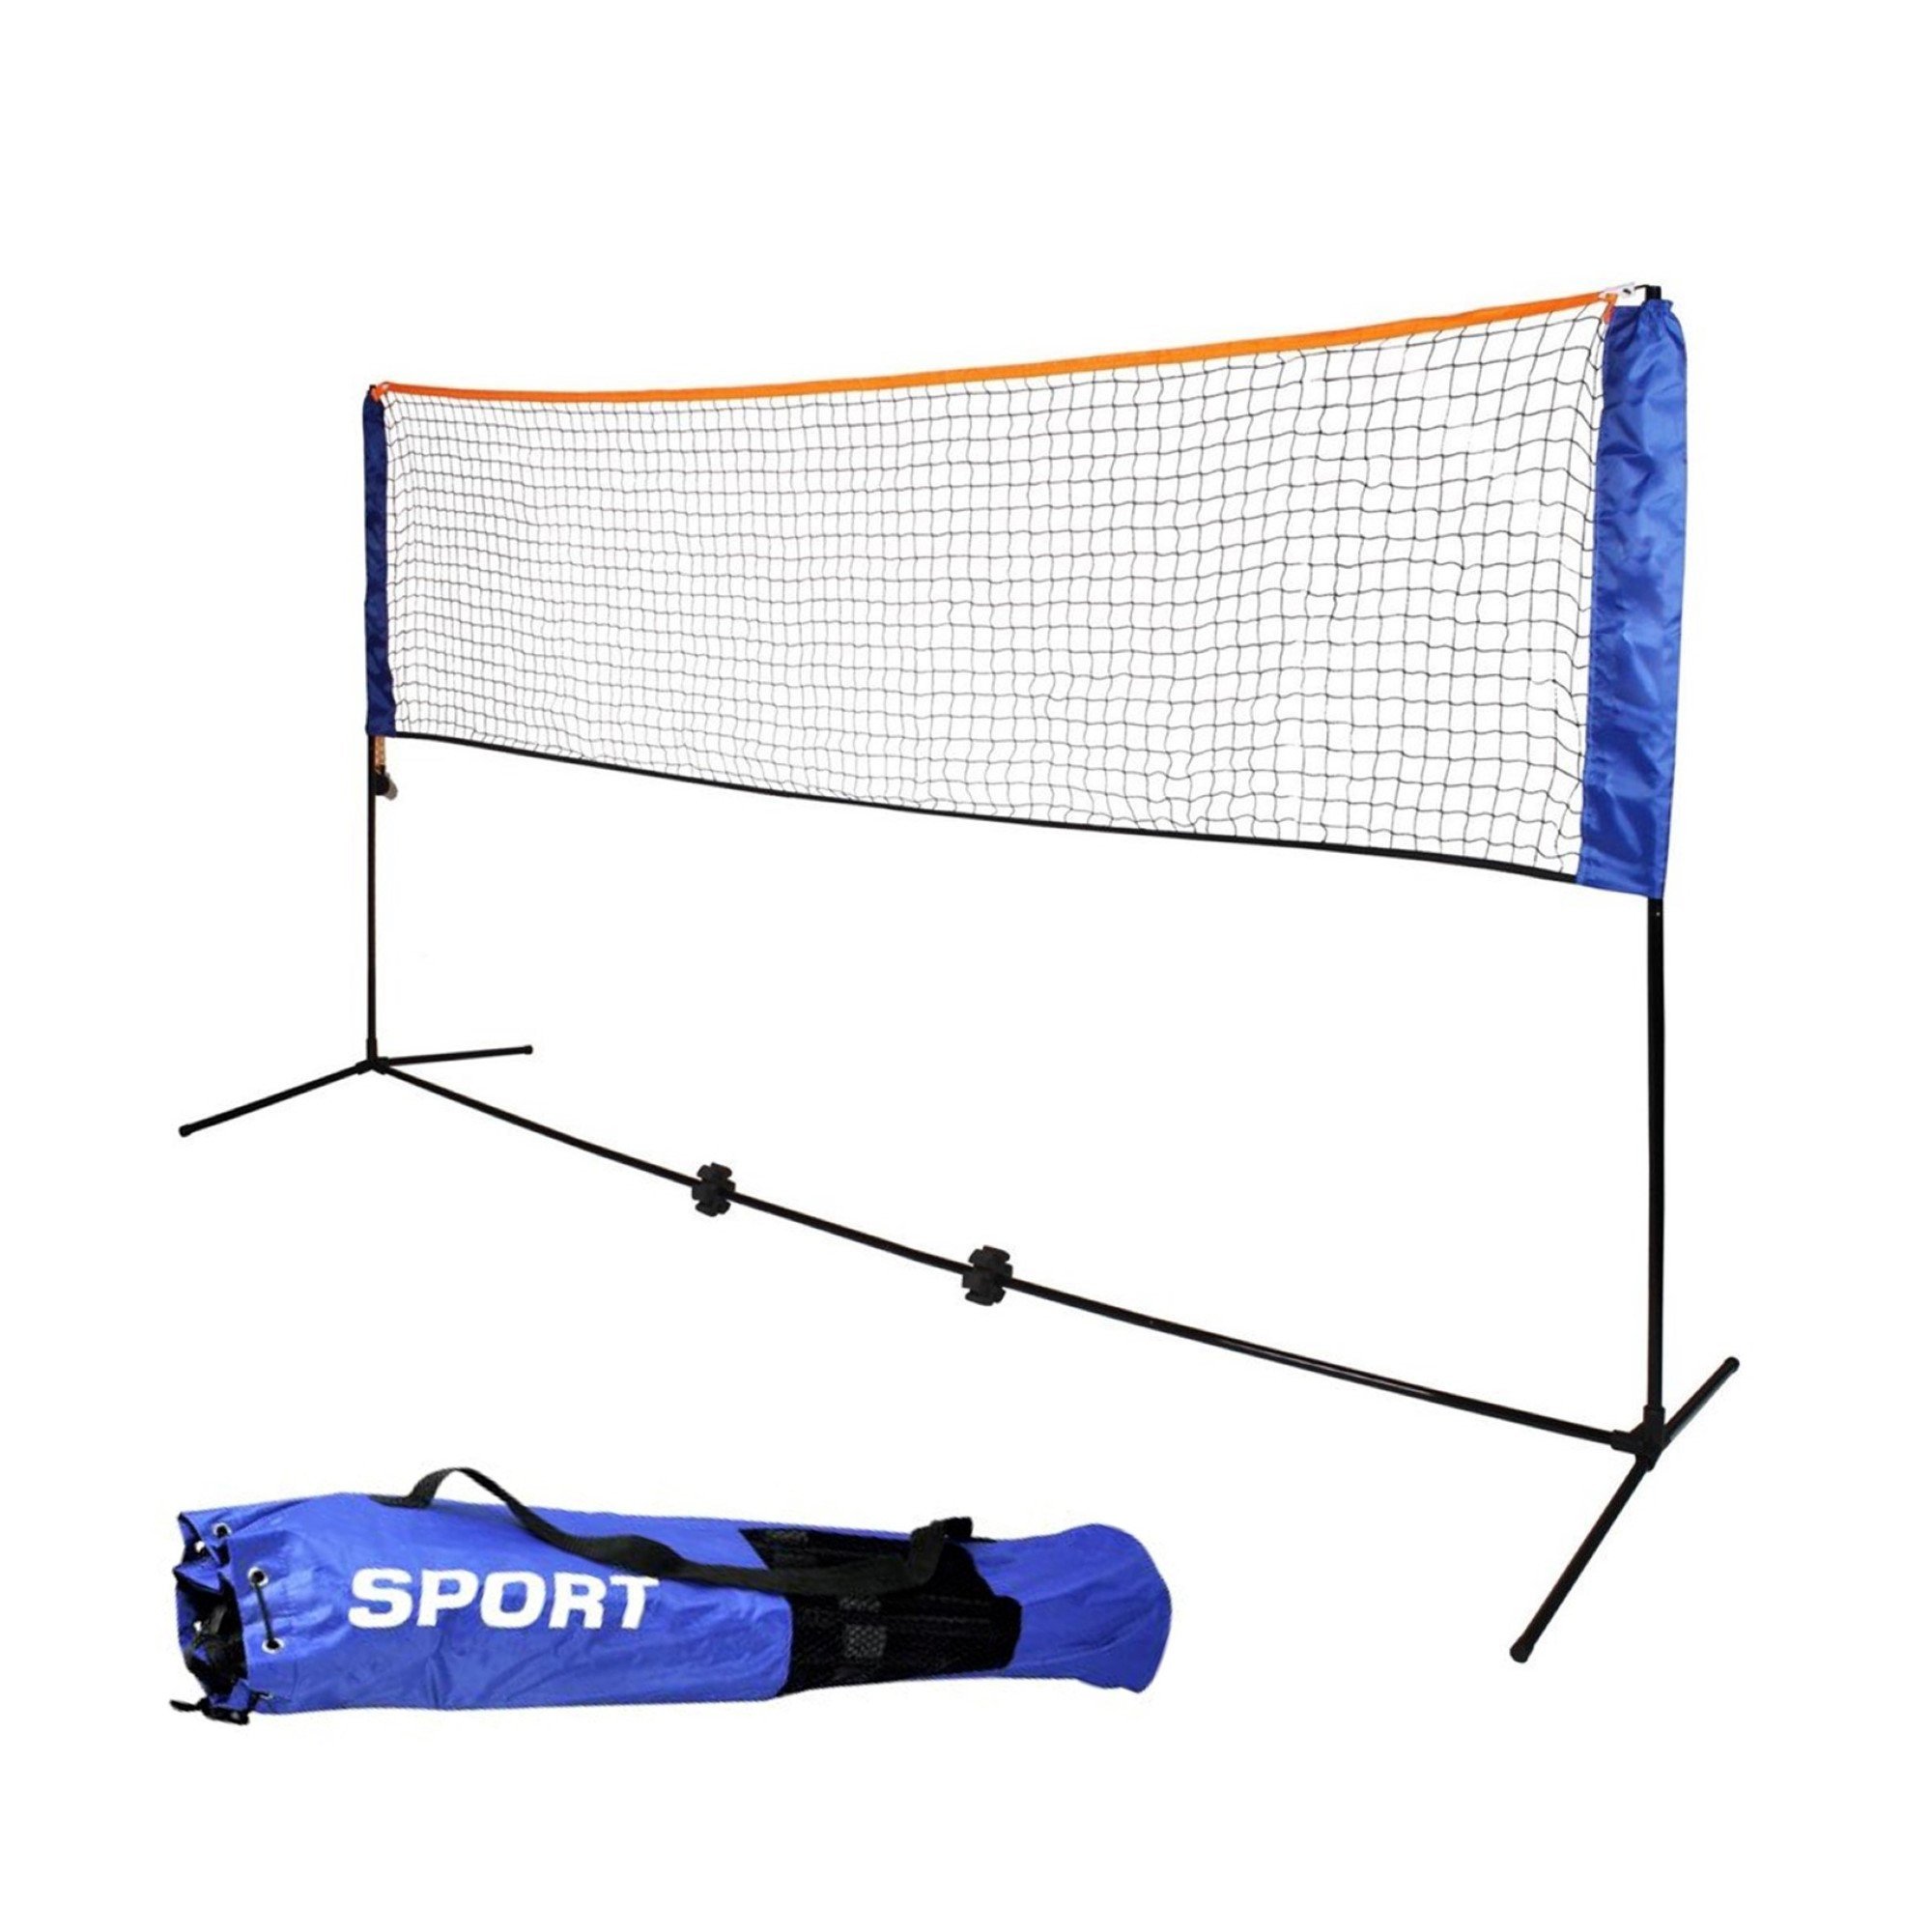 Large 5m Adjustable Foldable Badminton Tennis Volleyball Net - Click Image to Close